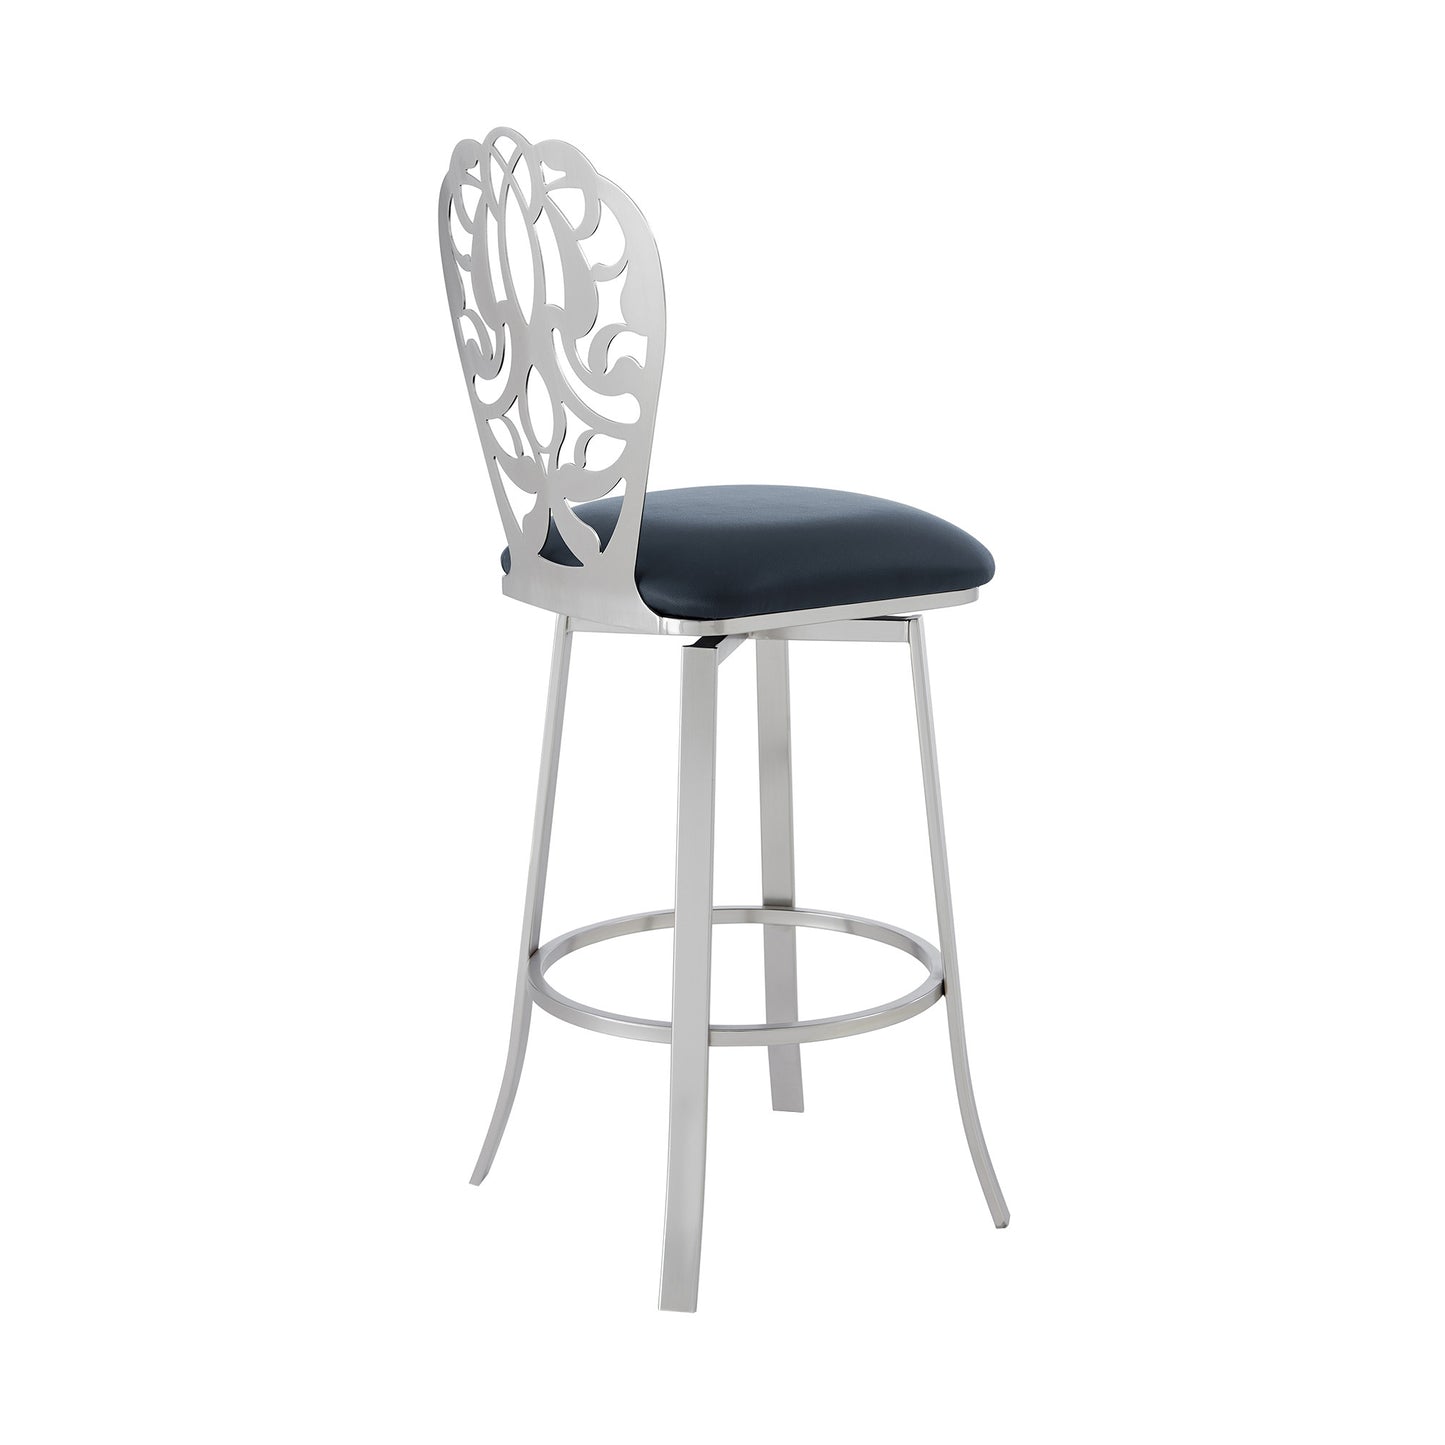 30" Grey Faux Leather Scroll Brushed Stainless Steel Swivel Bar Stool